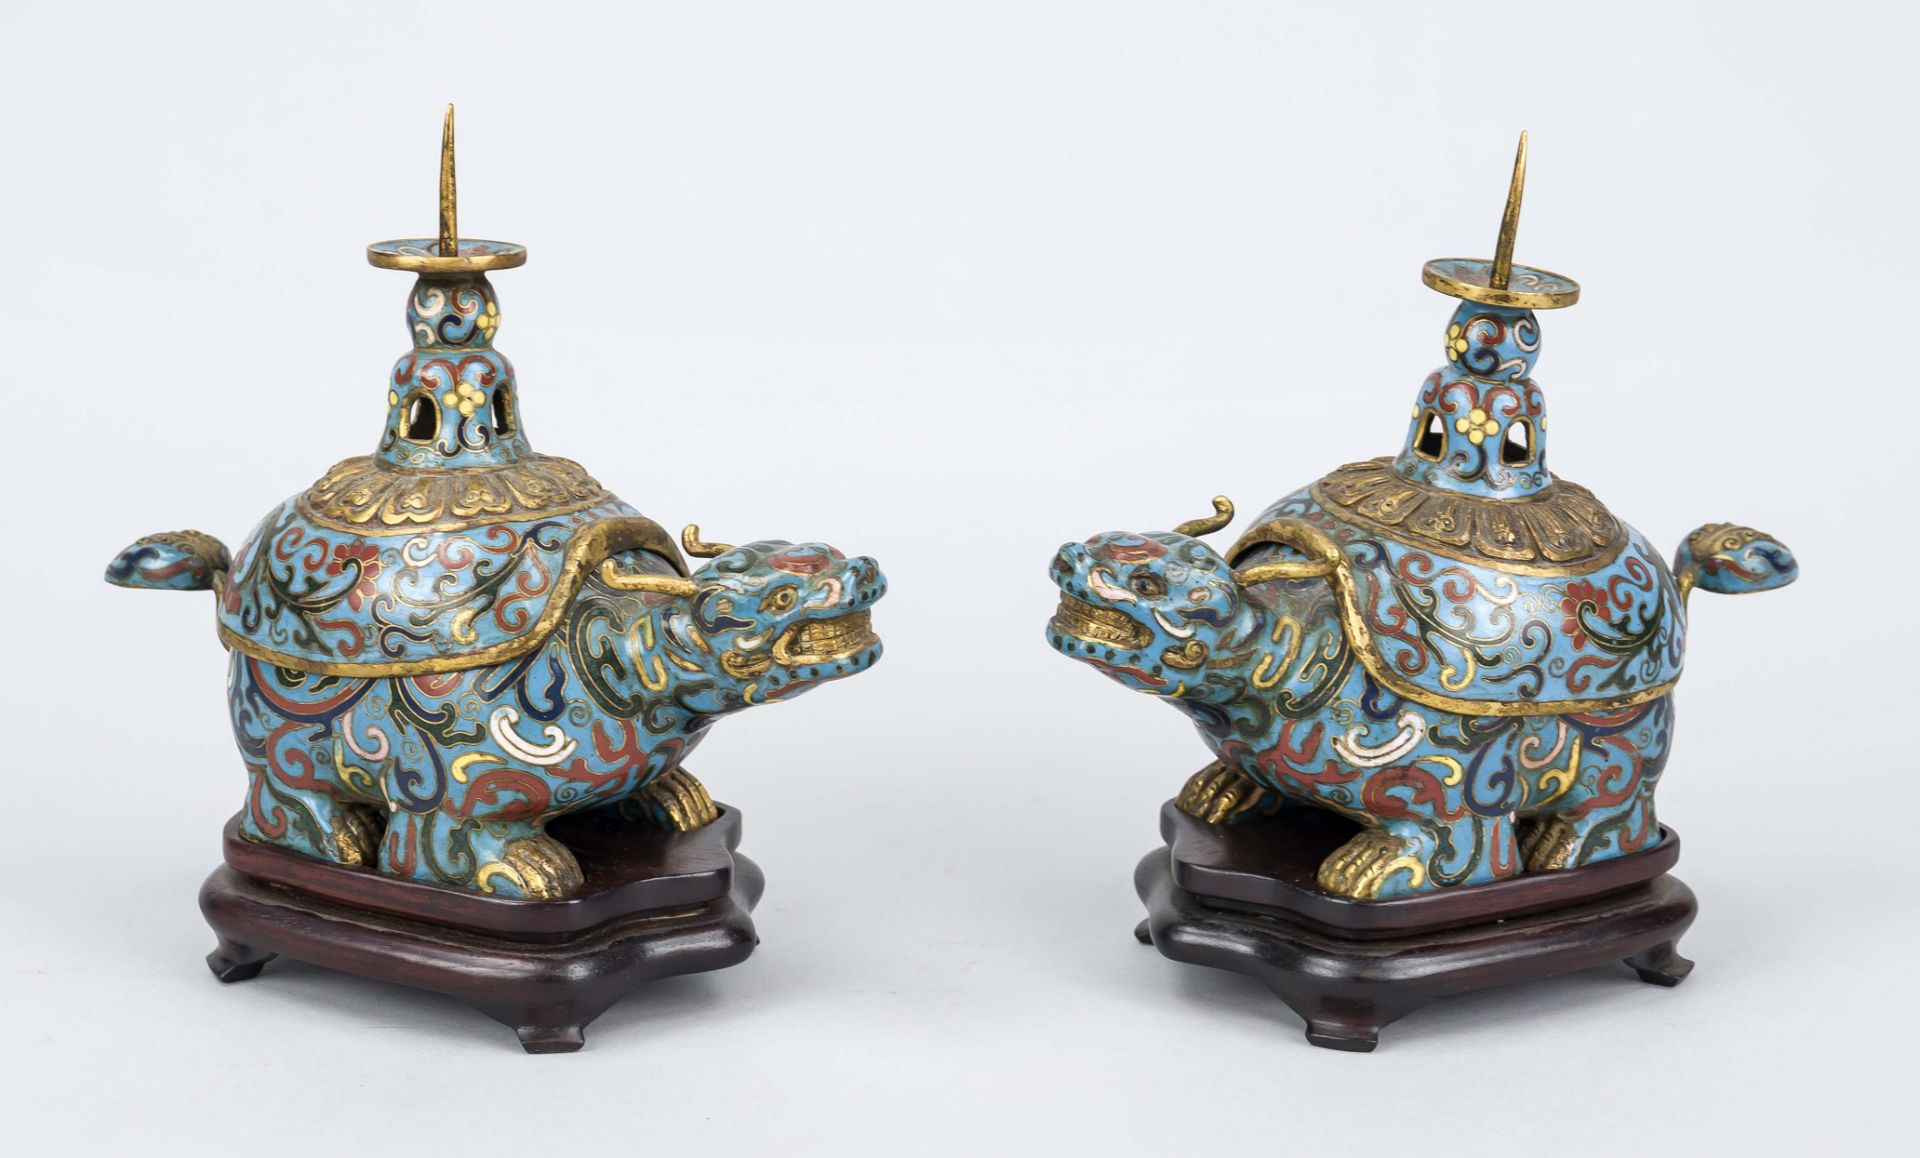 Pair of figural cloisonné censers with candlesticks, China 19th century (Qing). Open-worked lids,